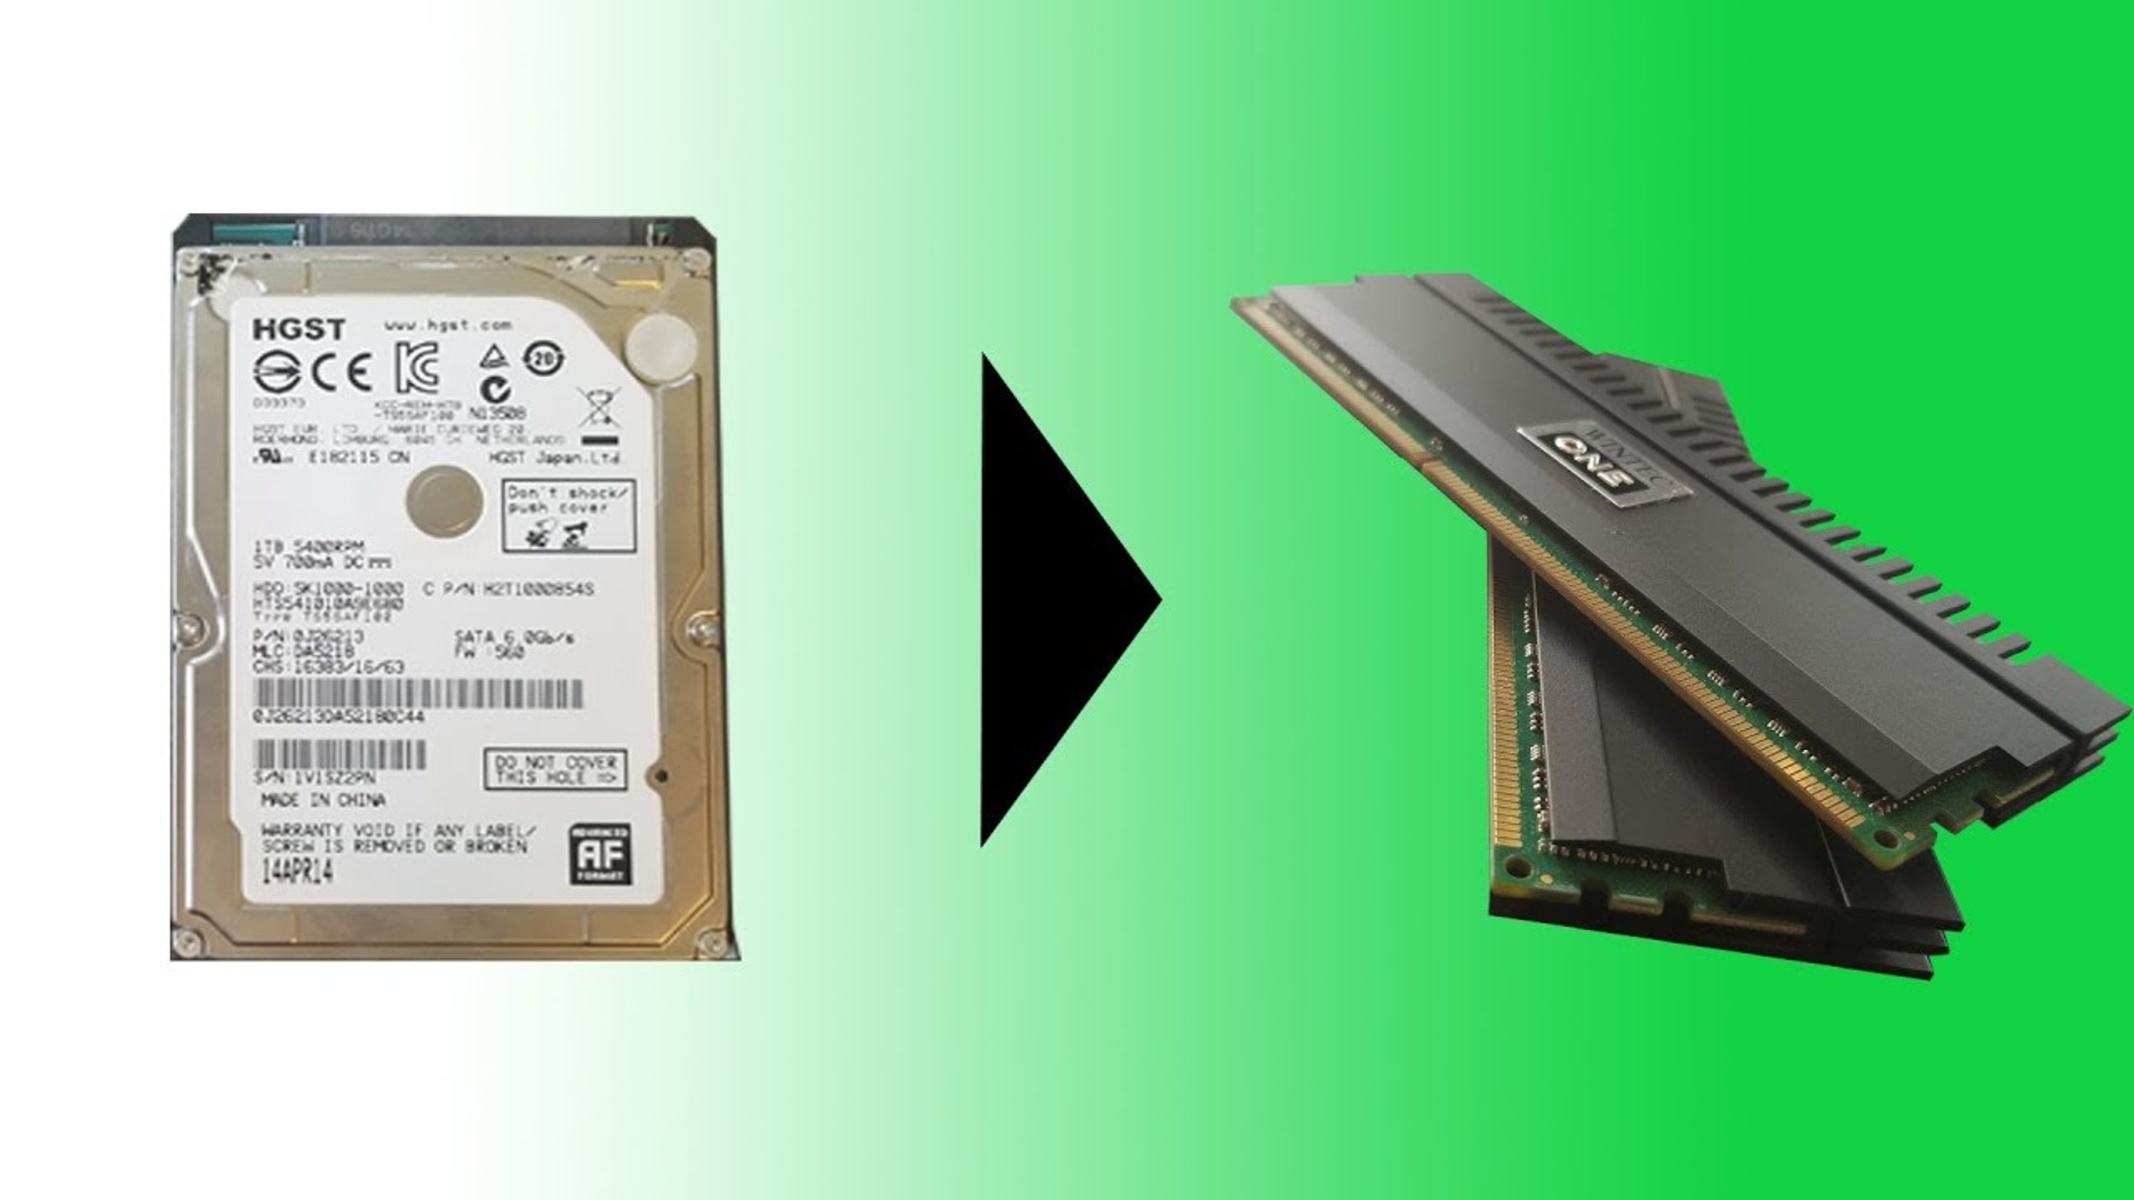 What Do PC’s Use On The Hard Drive As An Extension Of System RAM?